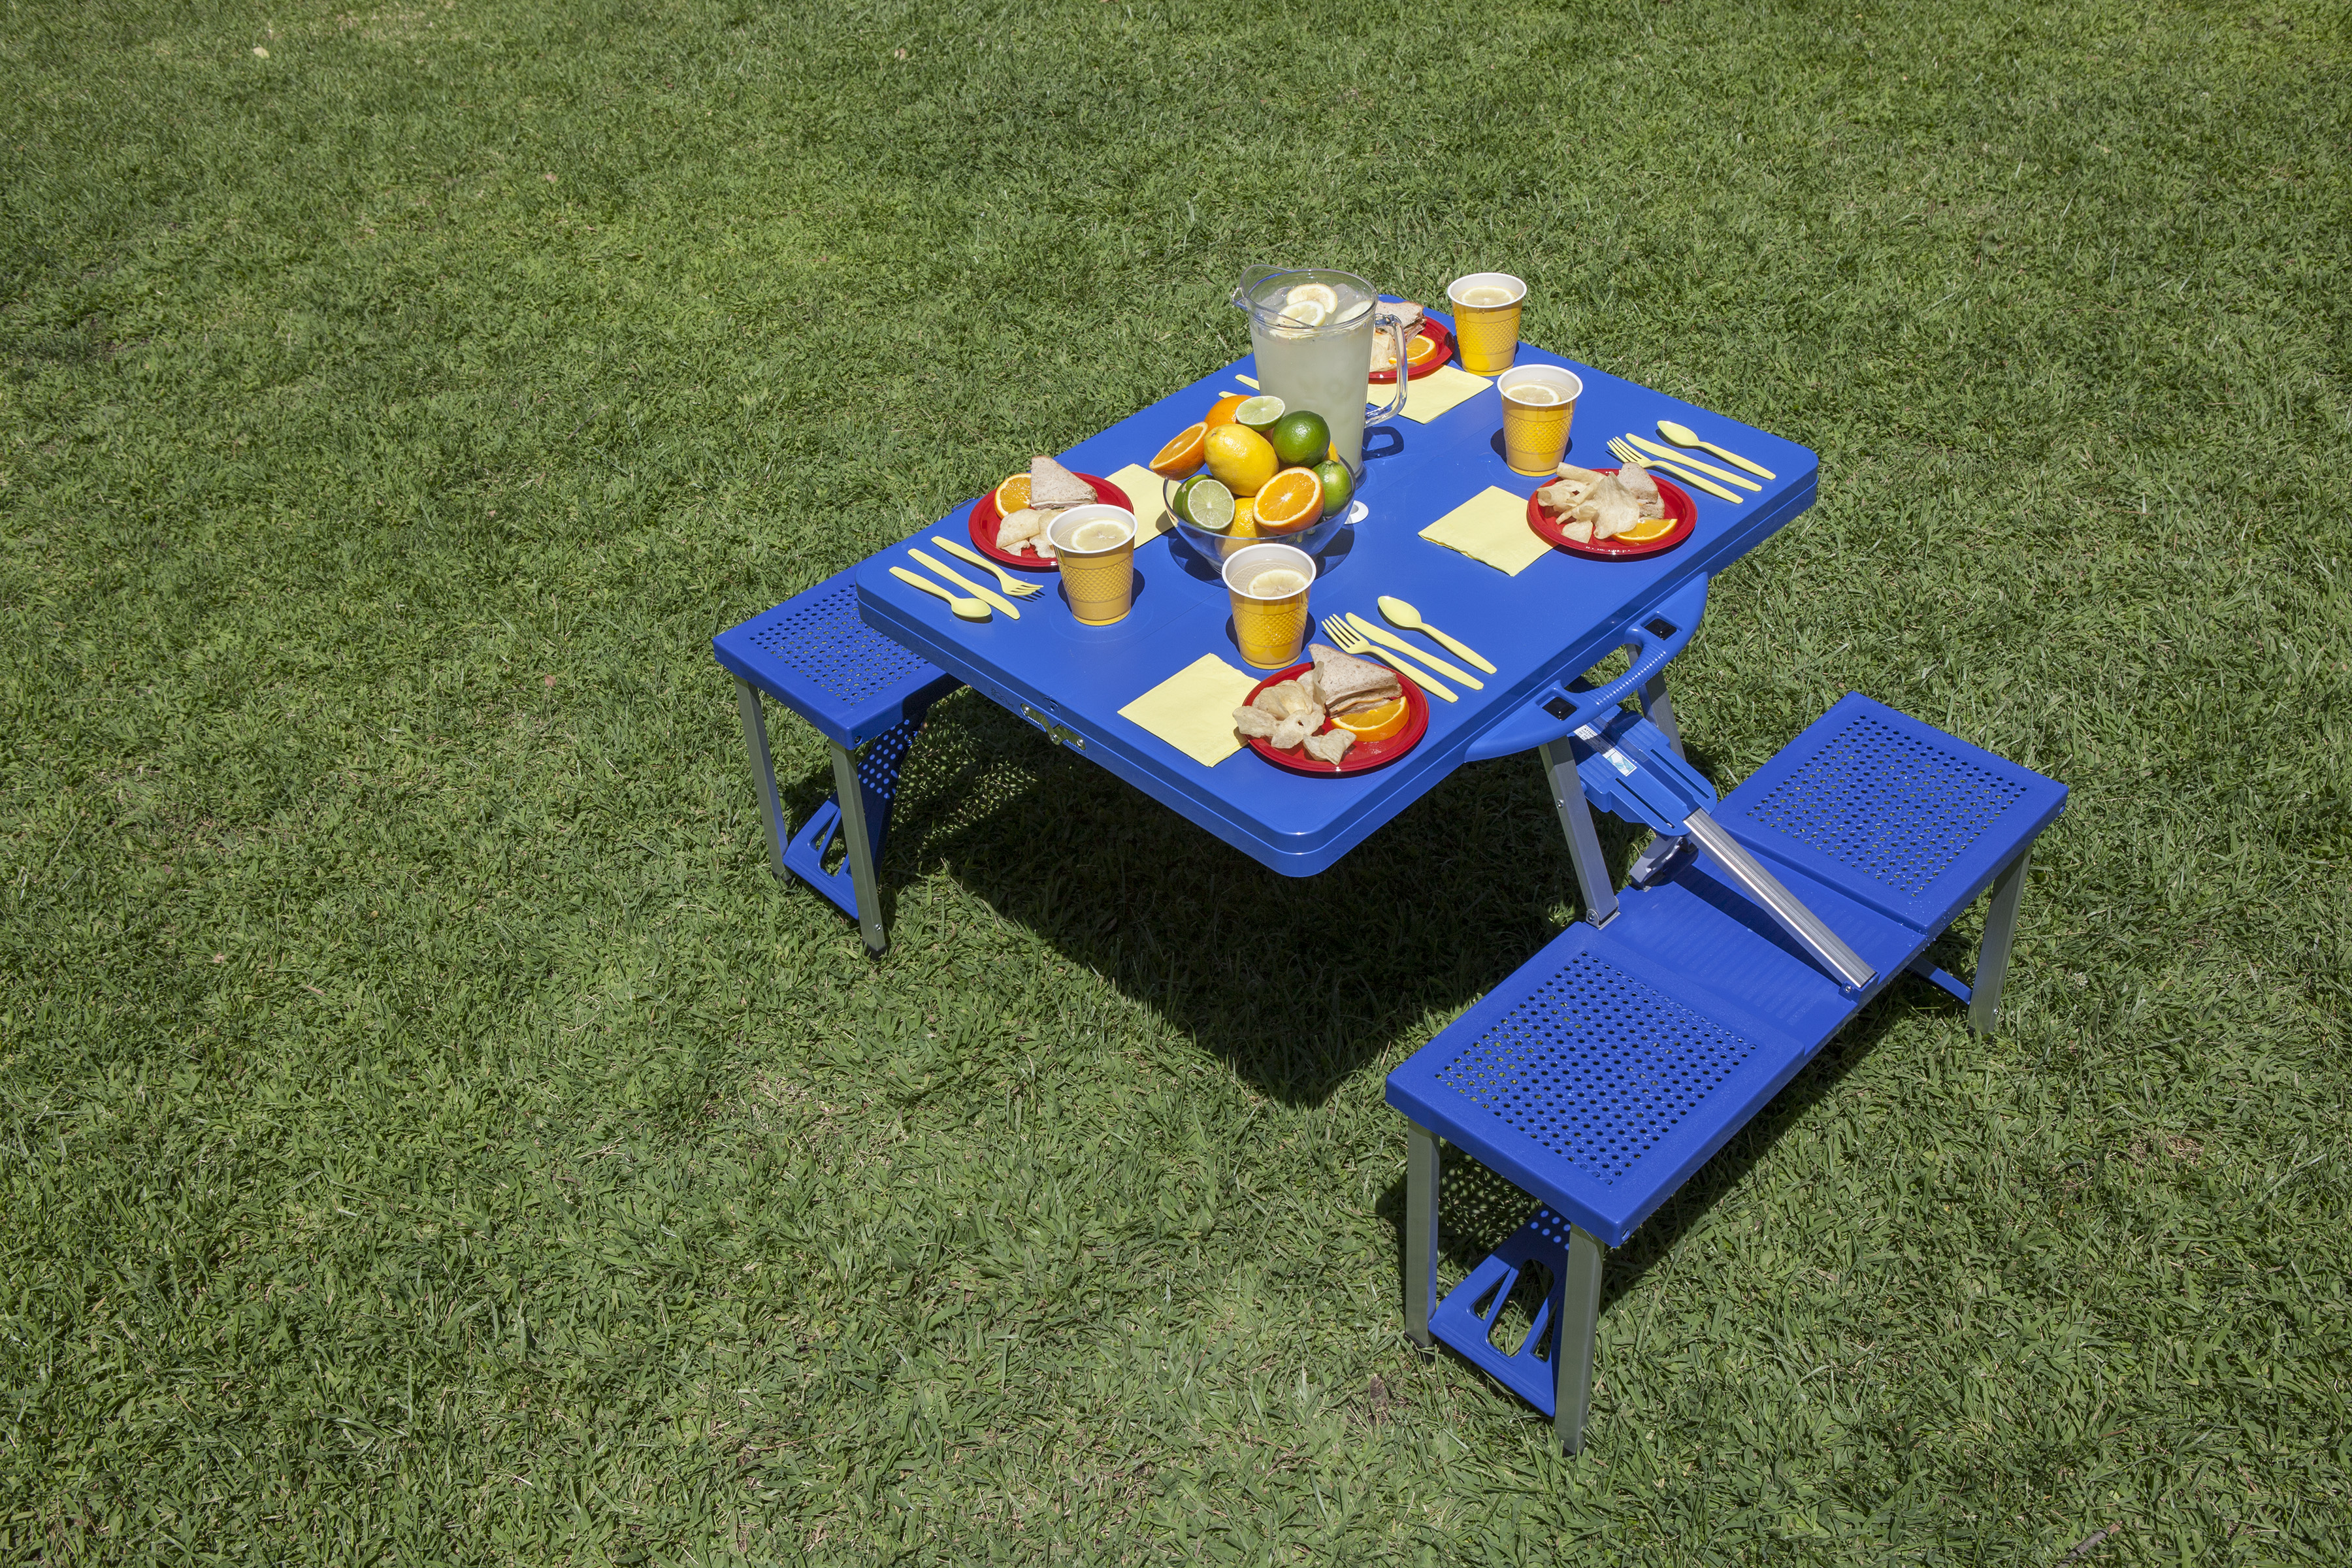 Hockey Rink - Toronto Maple Leafs - Picnic Table Portable Folding Table with Seats